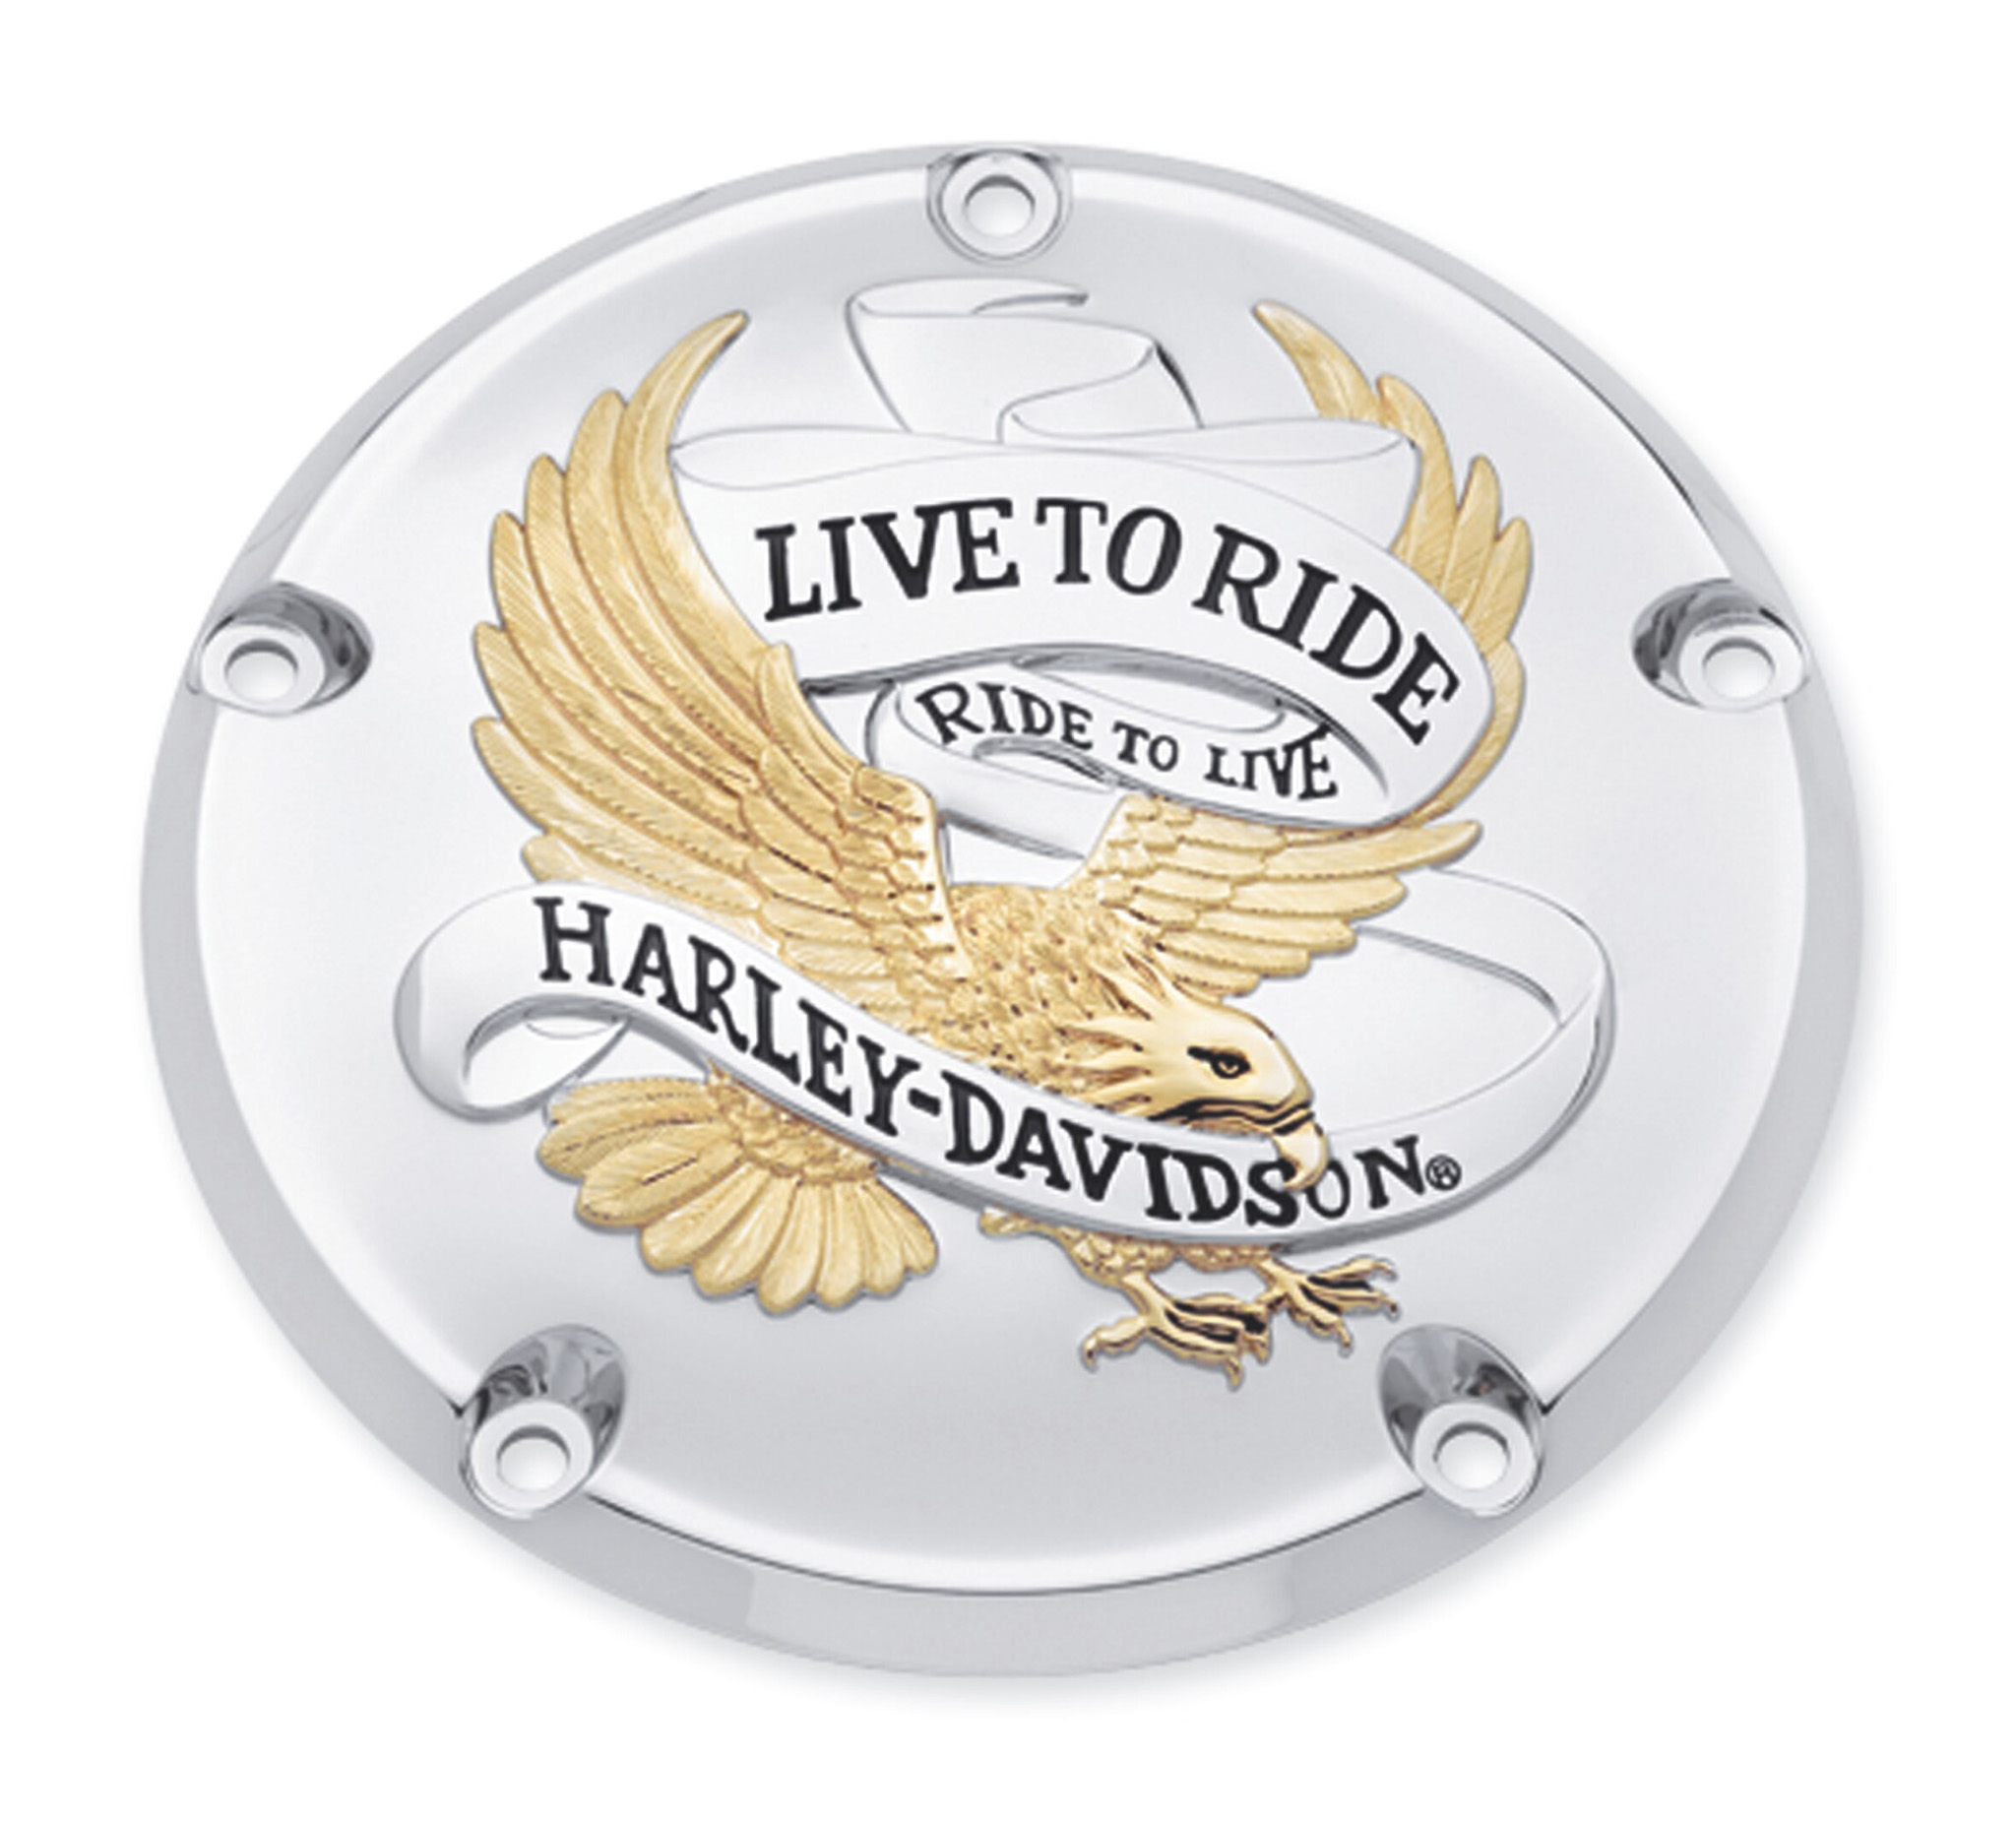 25340-99A Harley-Davidson The "Live To Ride" Derby Cover Gold 